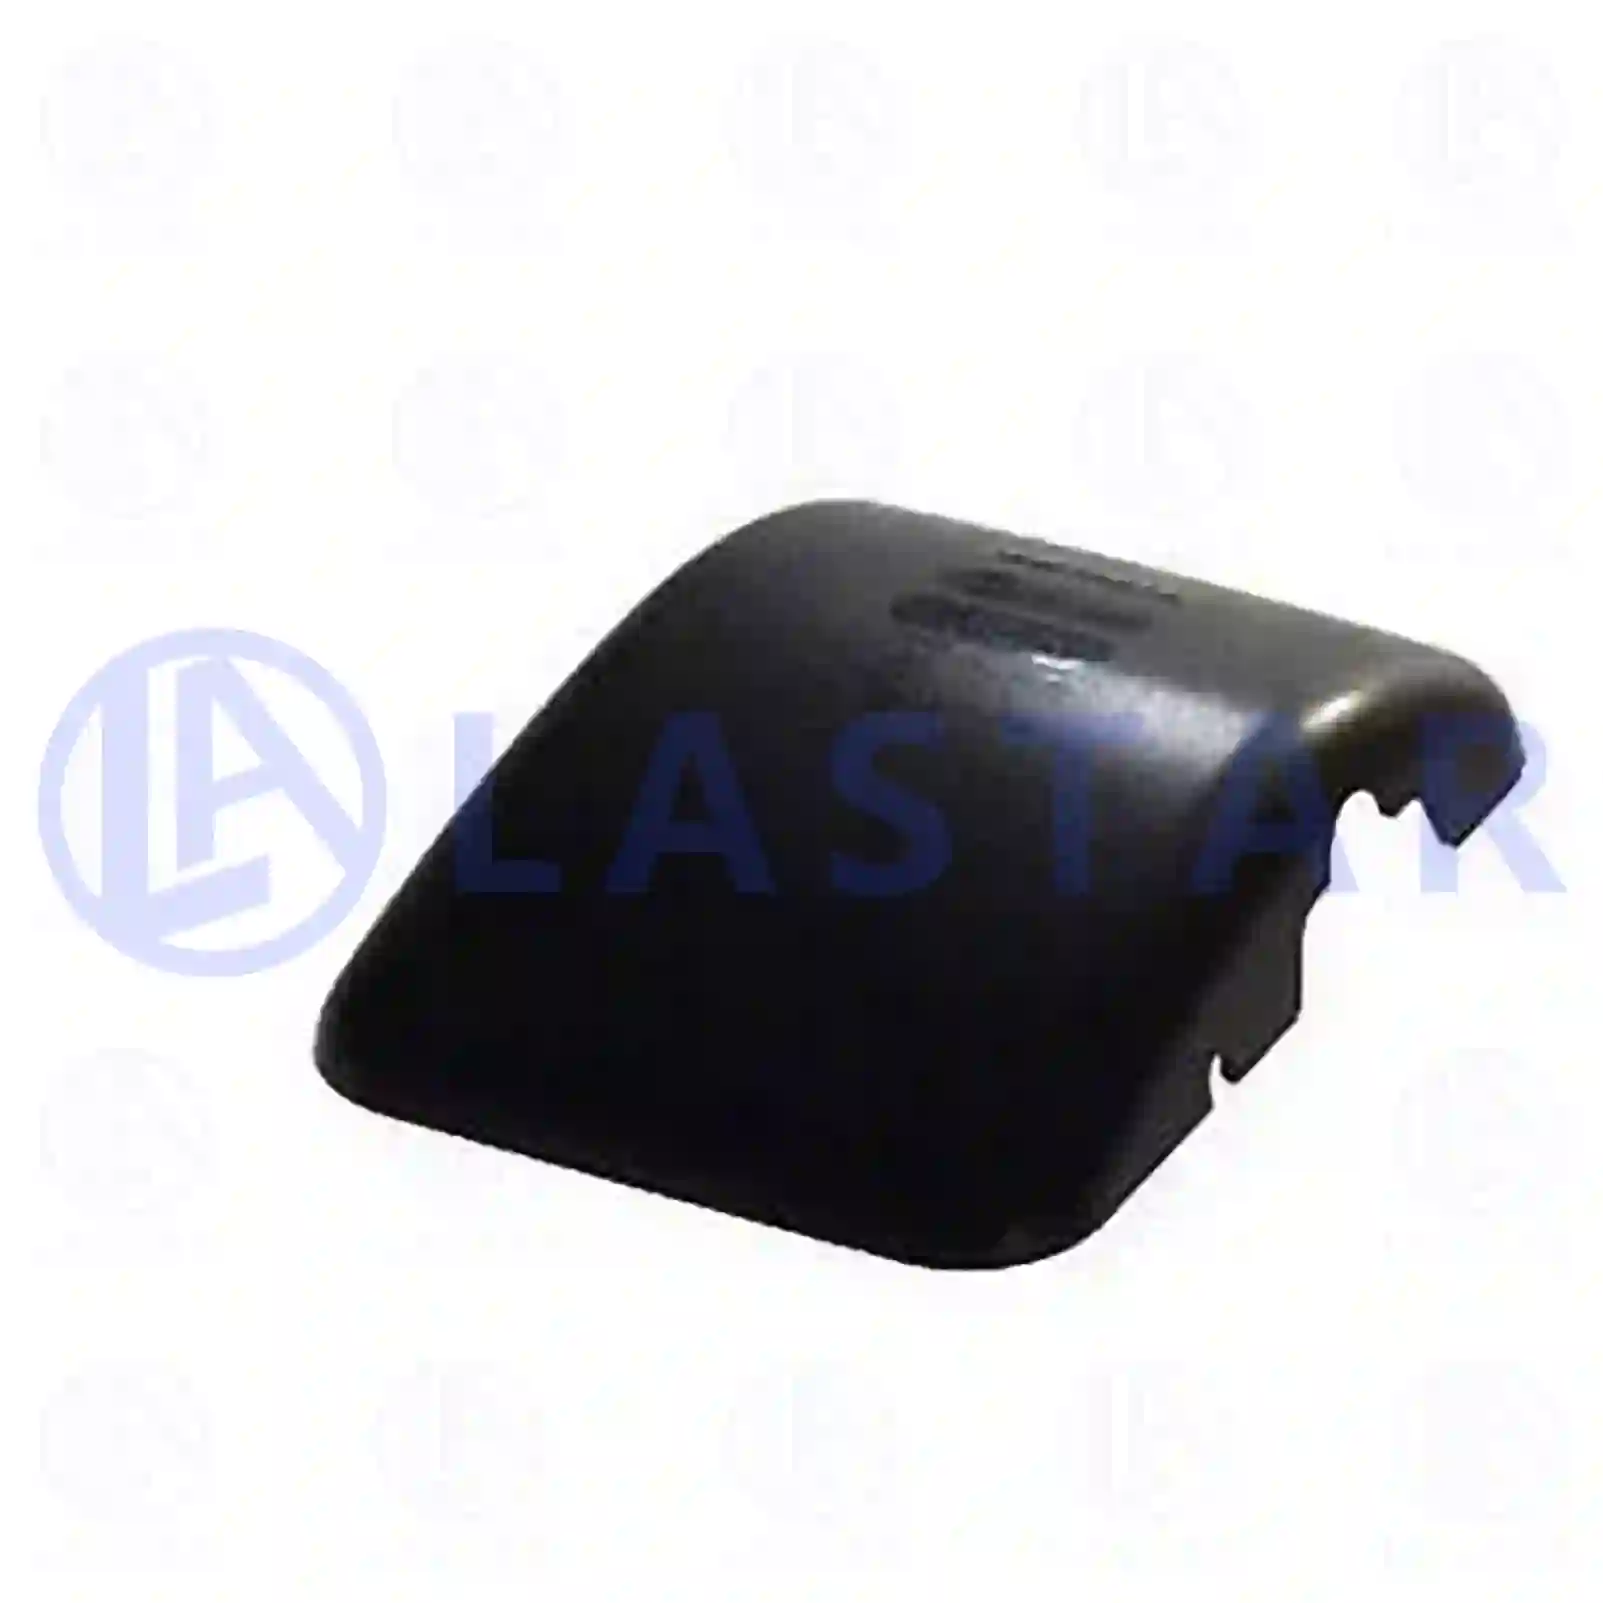 Cover, wide view mirror, 77718574, 81637320045, 8163 ||  77718574 Lastar Spare Part | Truck Spare Parts, Auotomotive Spare Parts Cover, wide view mirror, 77718574, 81637320045, 8163 ||  77718574 Lastar Spare Part | Truck Spare Parts, Auotomotive Spare Parts